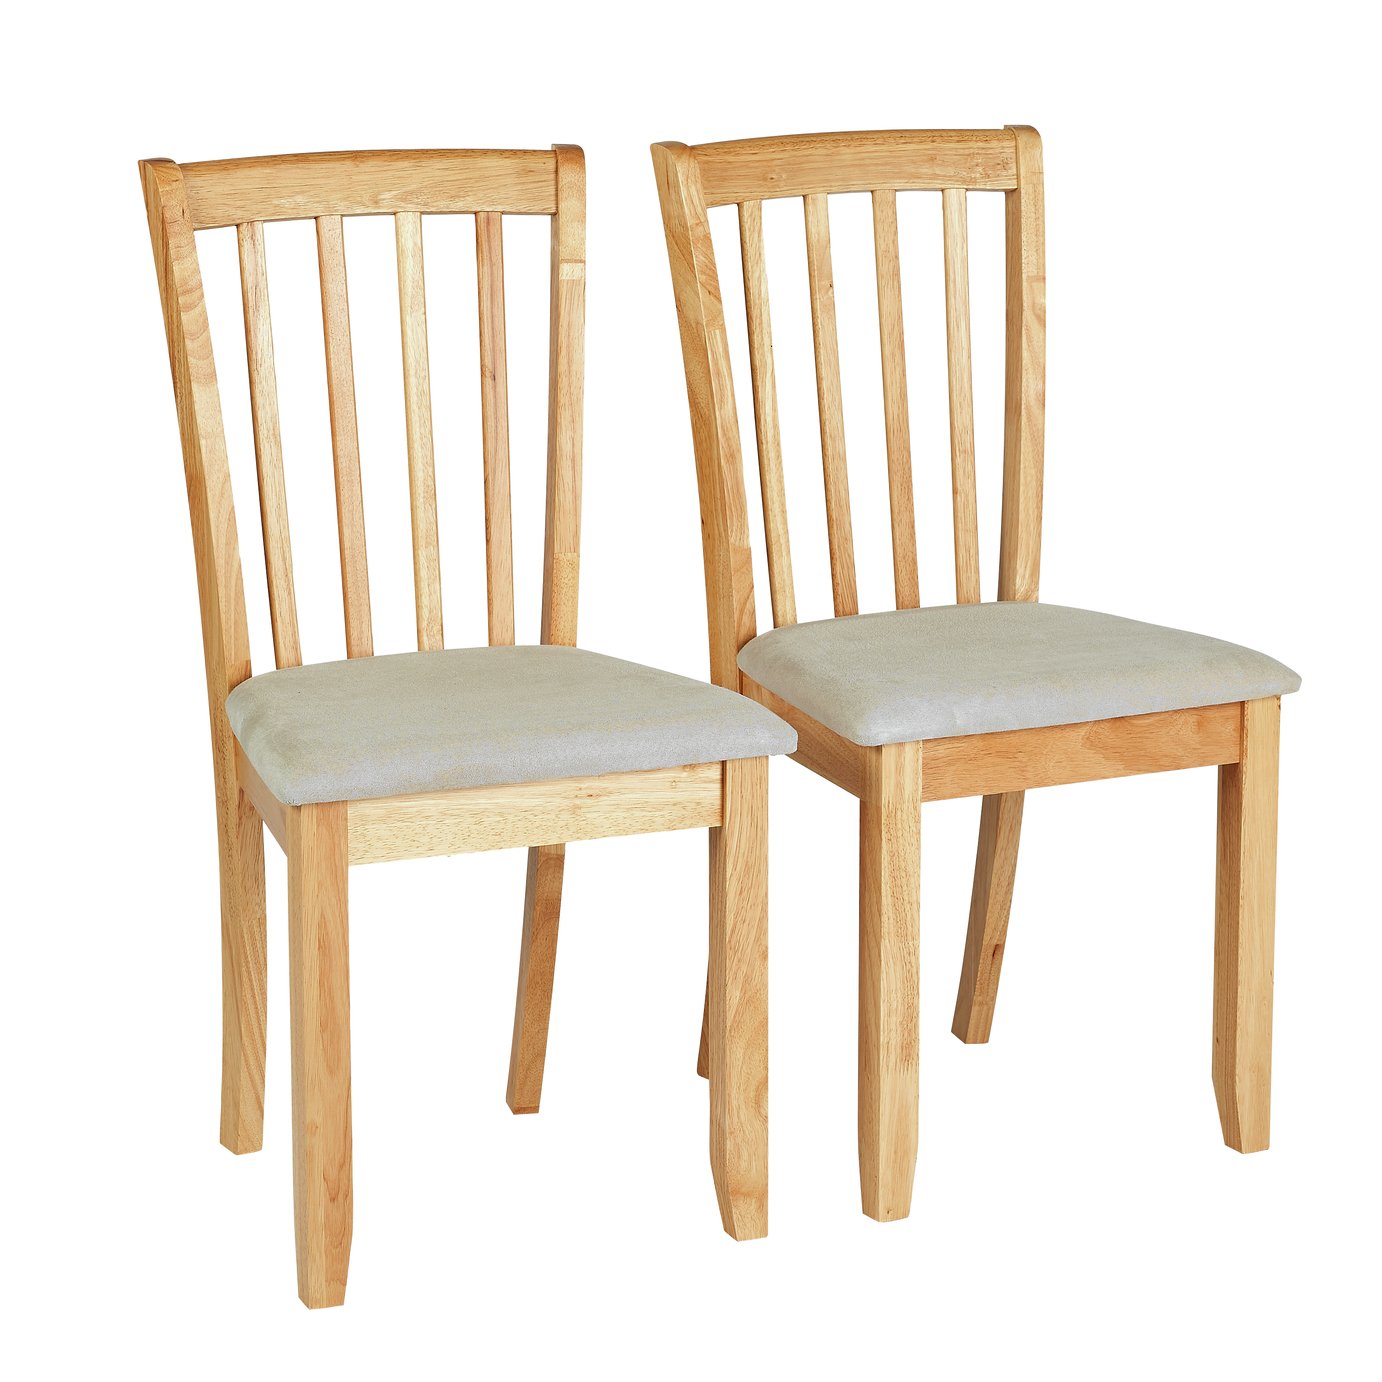 Argos Home Banbury Pair of Dining Chairs review